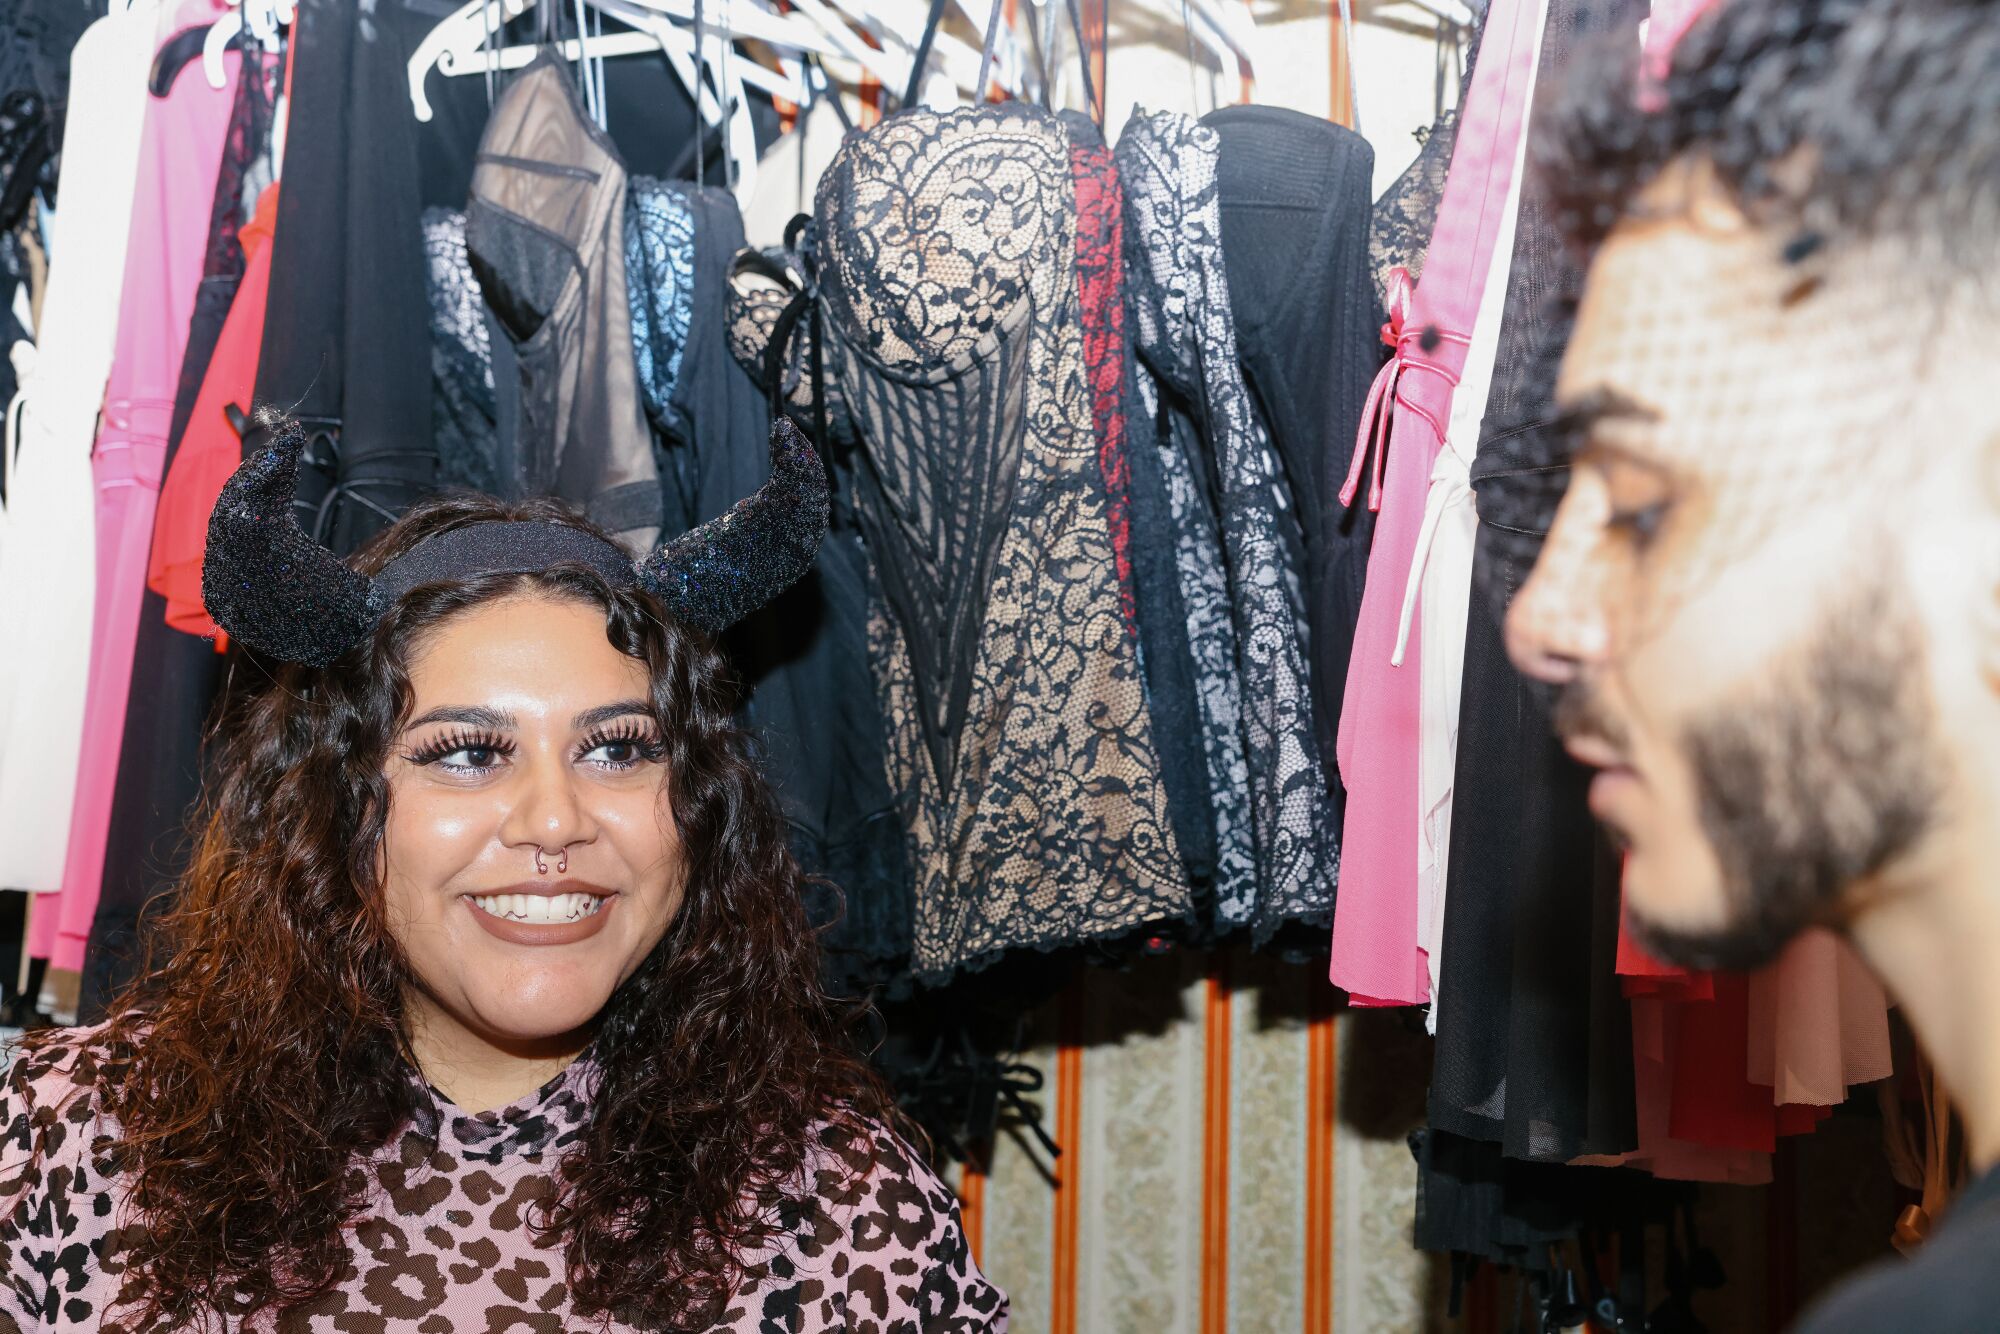 A woman wearing a black fabric horned headband smiles at a man standing amid lingerie for sale in a store.